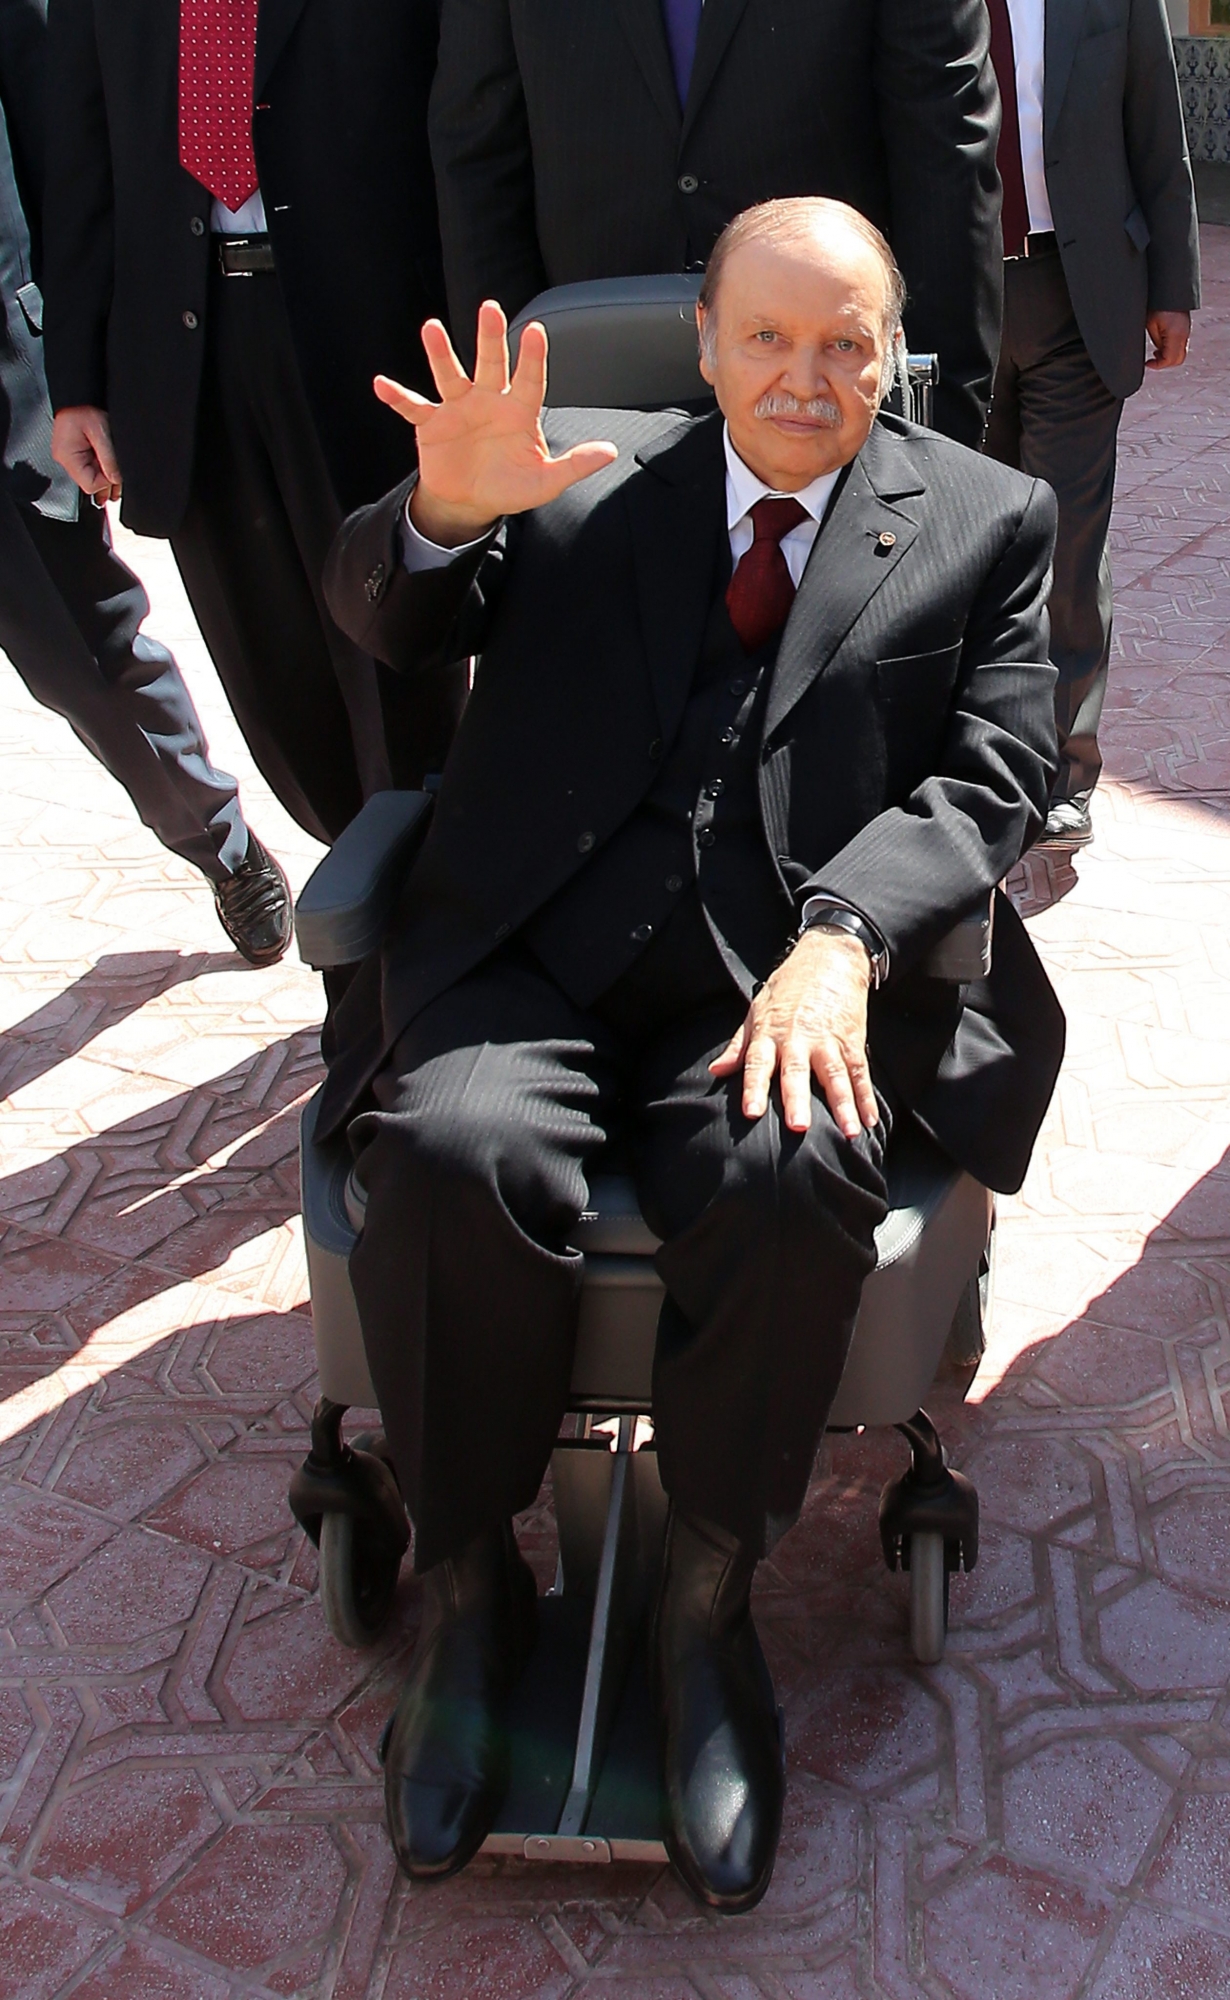 epa04169940 Algerian President Abdelaziz Bouteflika, who is seeking a fourth term, leaves after voting at a polling station in Algiers, Algeria, 17 April 2014. Bouteflika arrived in a wheelchair at a school in the capital where he cast his ballot. The 77-year-old incumbent, who has uttered only a few sentences in public since suffering a stroke last year, was accompanied to the polling station by his brother Said, who acts as his special adviser.  EPA/MOHAMED MESSARA ALGERIA PRESIDENTIAL ELECTIONS 2014